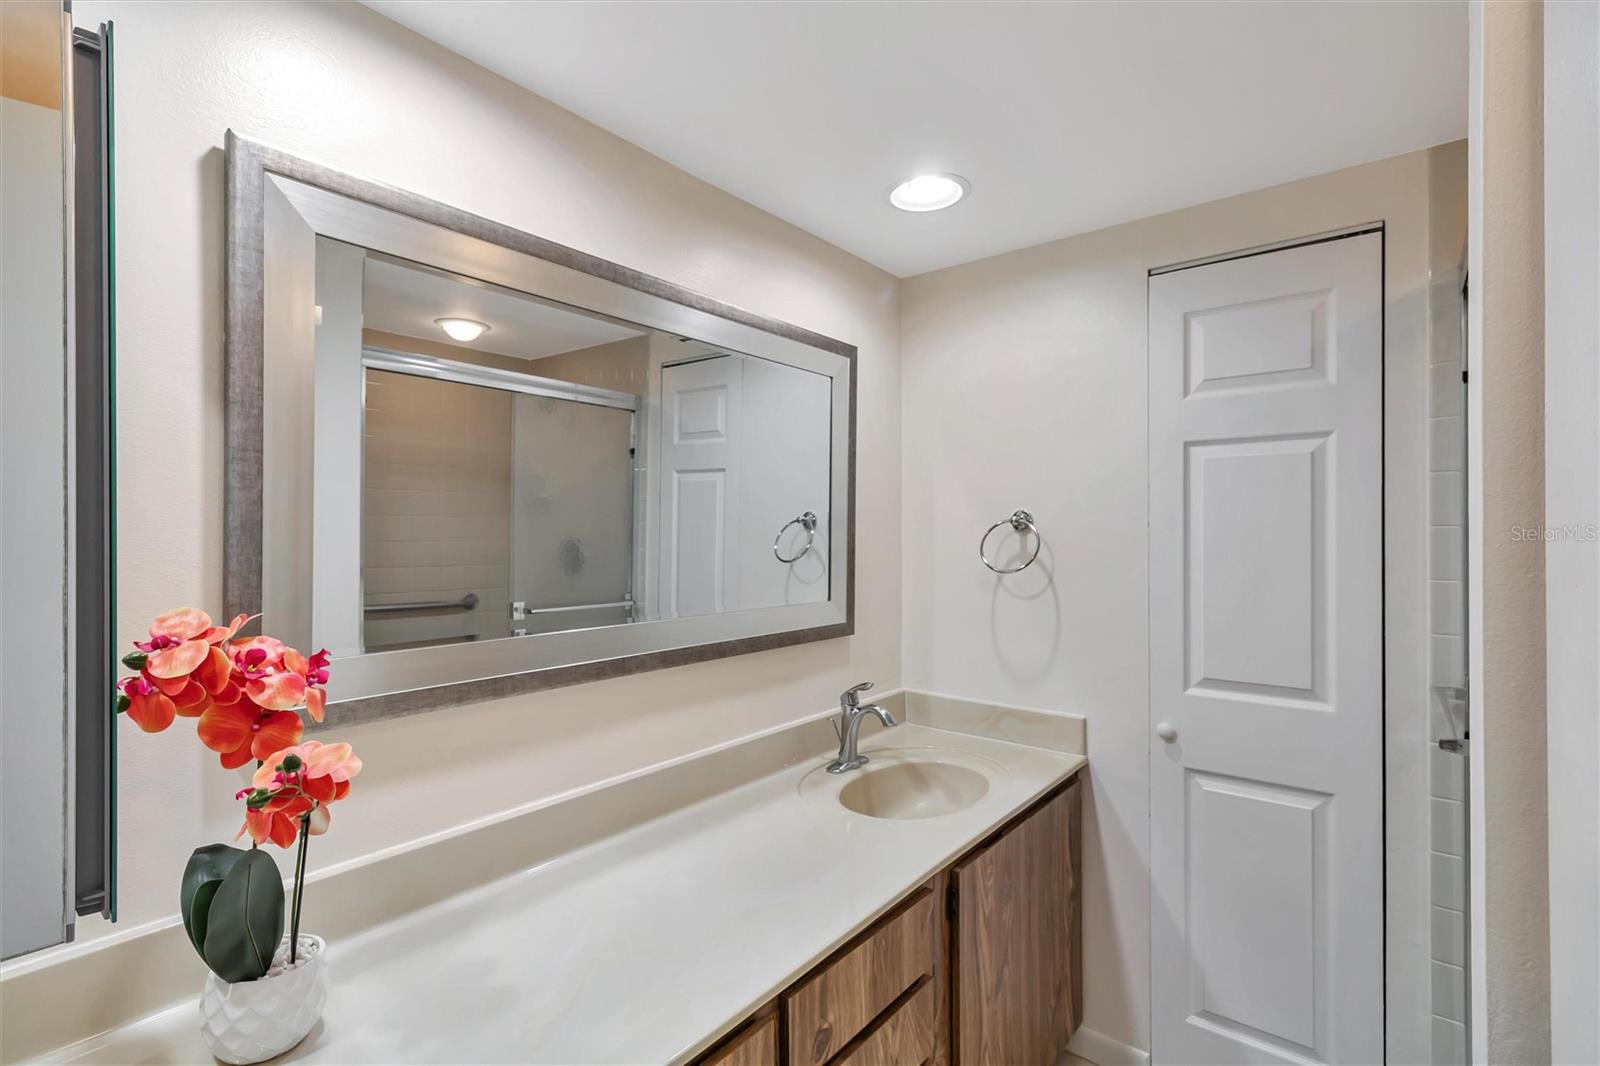 Primary bathroom with lots of counterspace and walk-in shower and linen closet